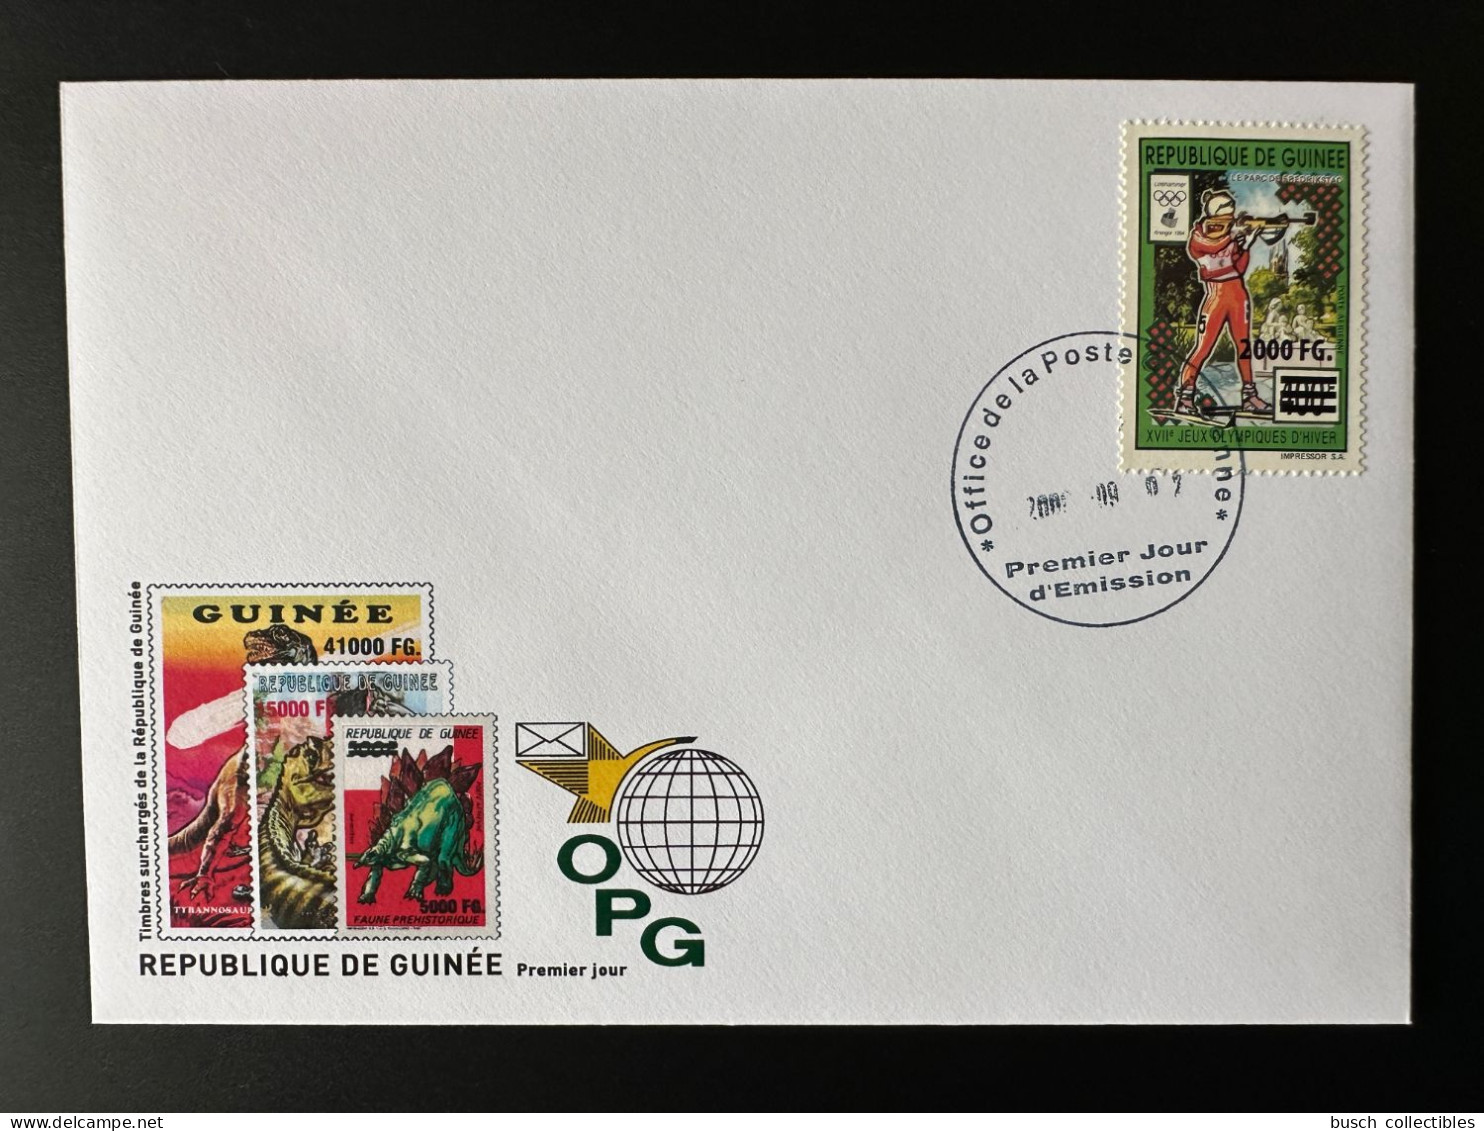 Guinée Guinea 2009 FDC Mi. 6763 Surch Overprint Winter Olympic Games Lillehammer 1994 Vancouver 2010 Jeux Olympiques Ski - Winter 2010: Vancouver